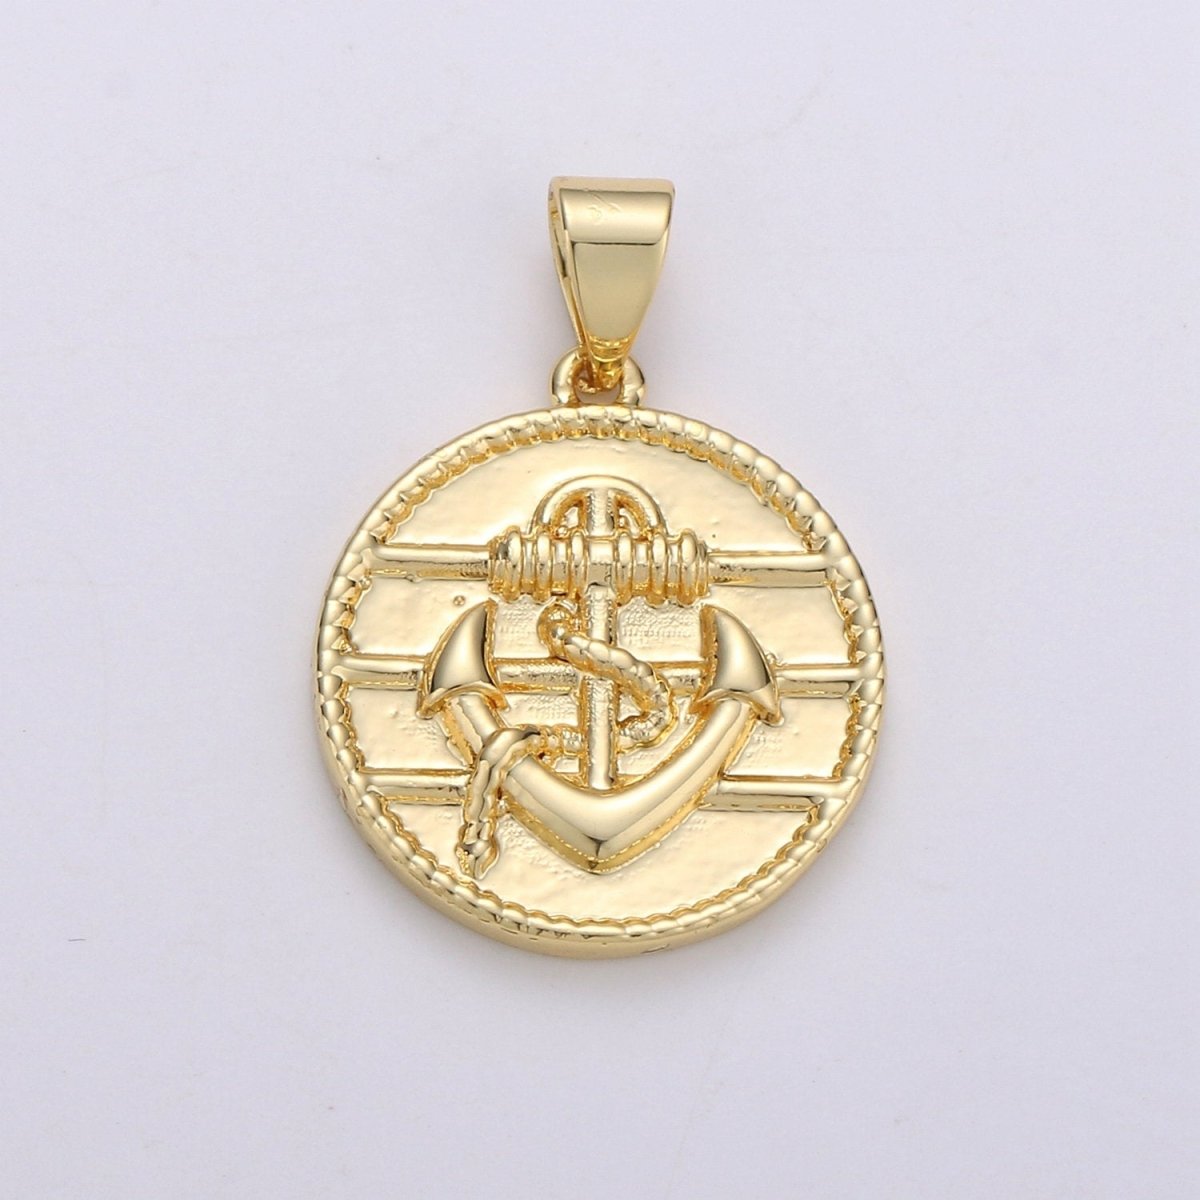 14K Gold Filled Anchor Pendant Craft Supplies For Necklace Bracelet Jewelry Making Nautical Jewelry Making Supply J-004 - DLUXCA